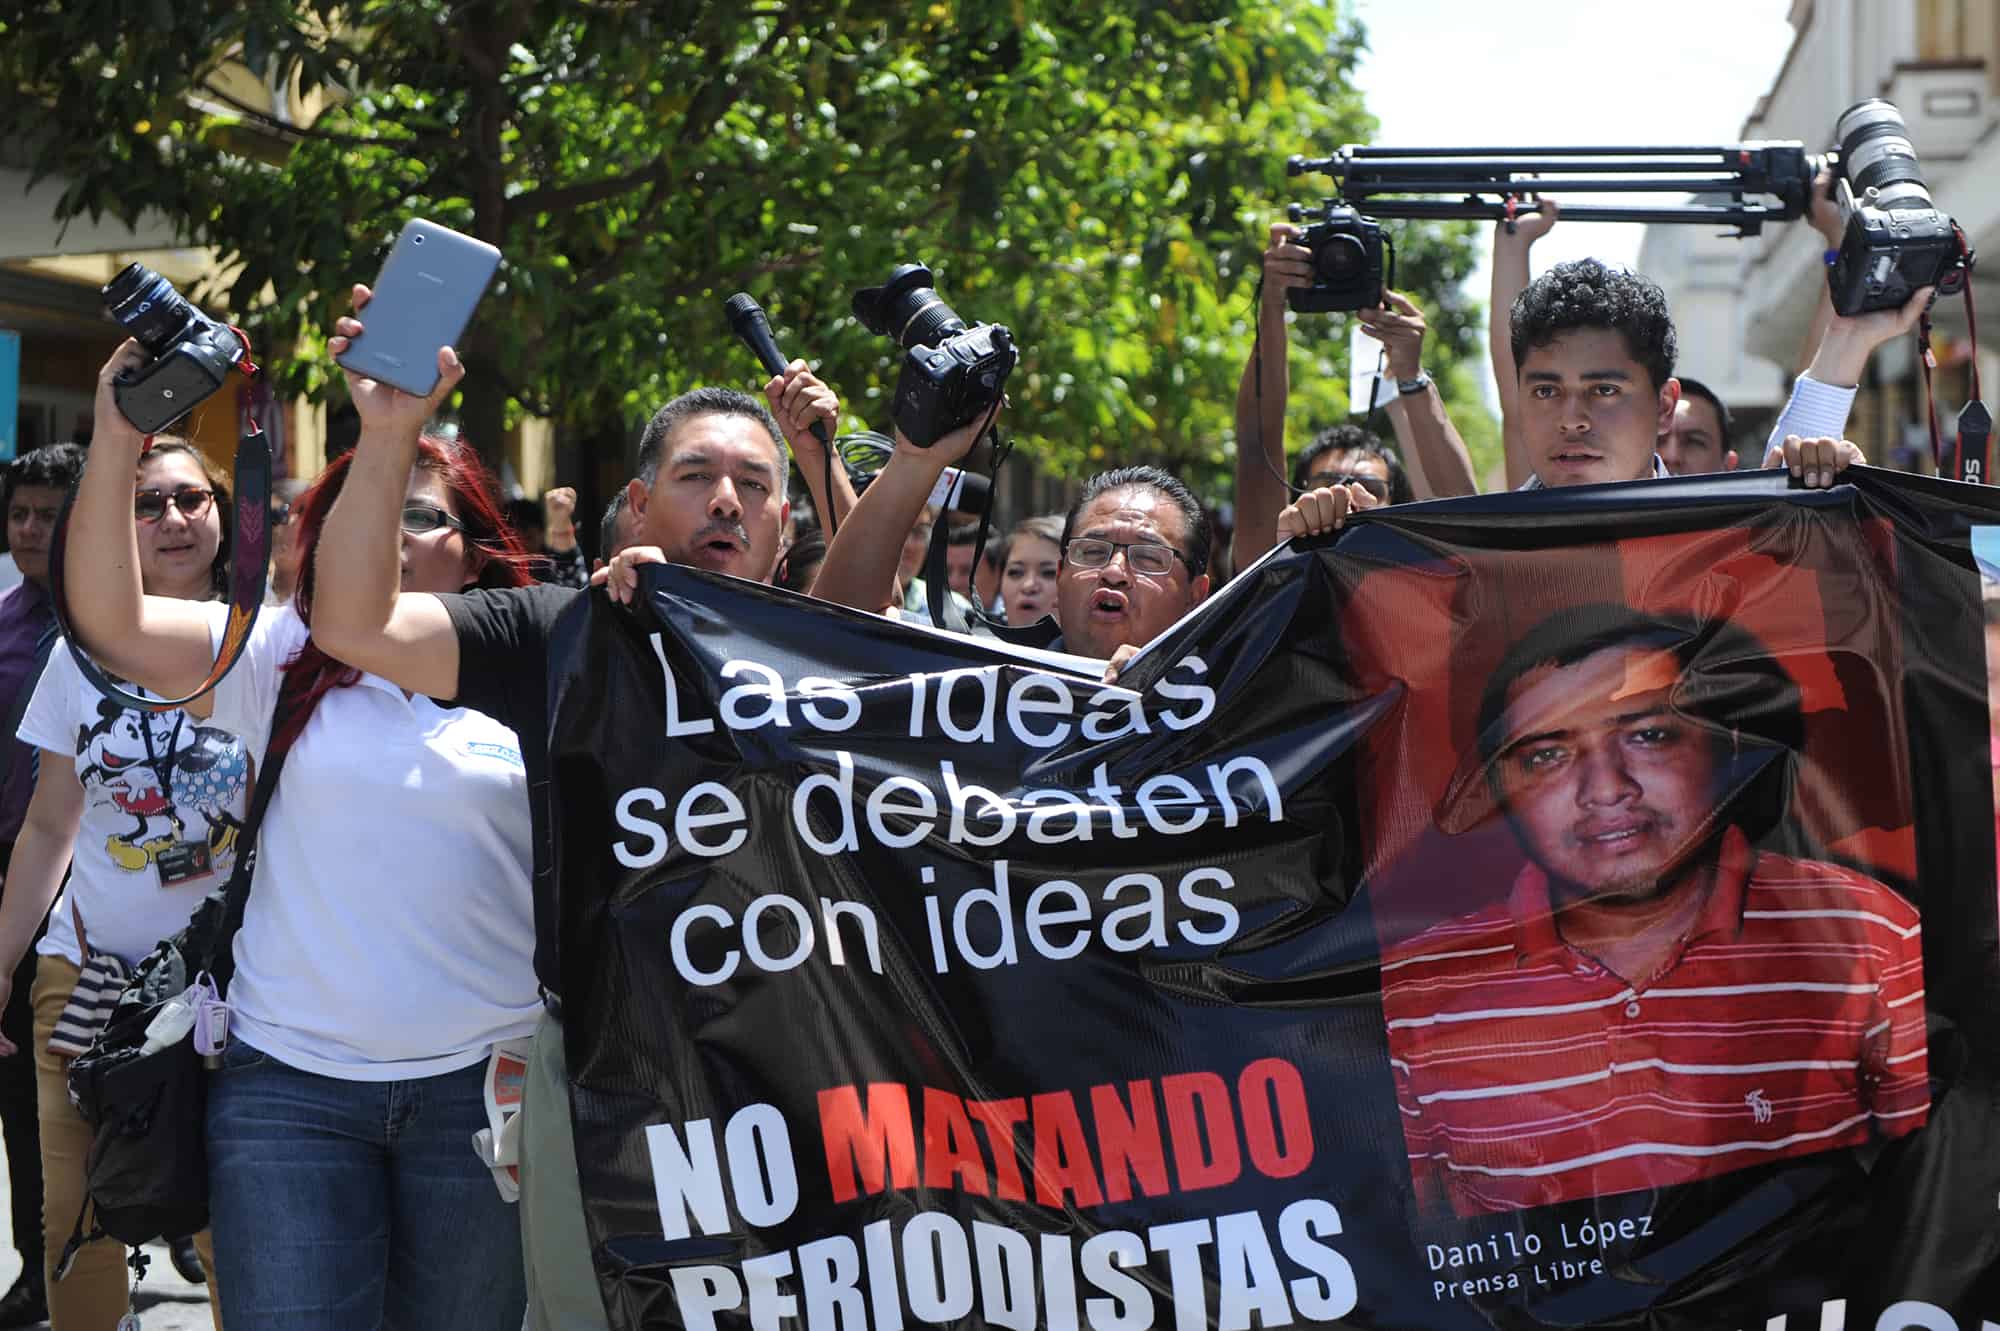 Guatemalan journalists carry a banner with the photos of two journalists killed on March 10 in an attack. Guatemala City, March 11, 2015.